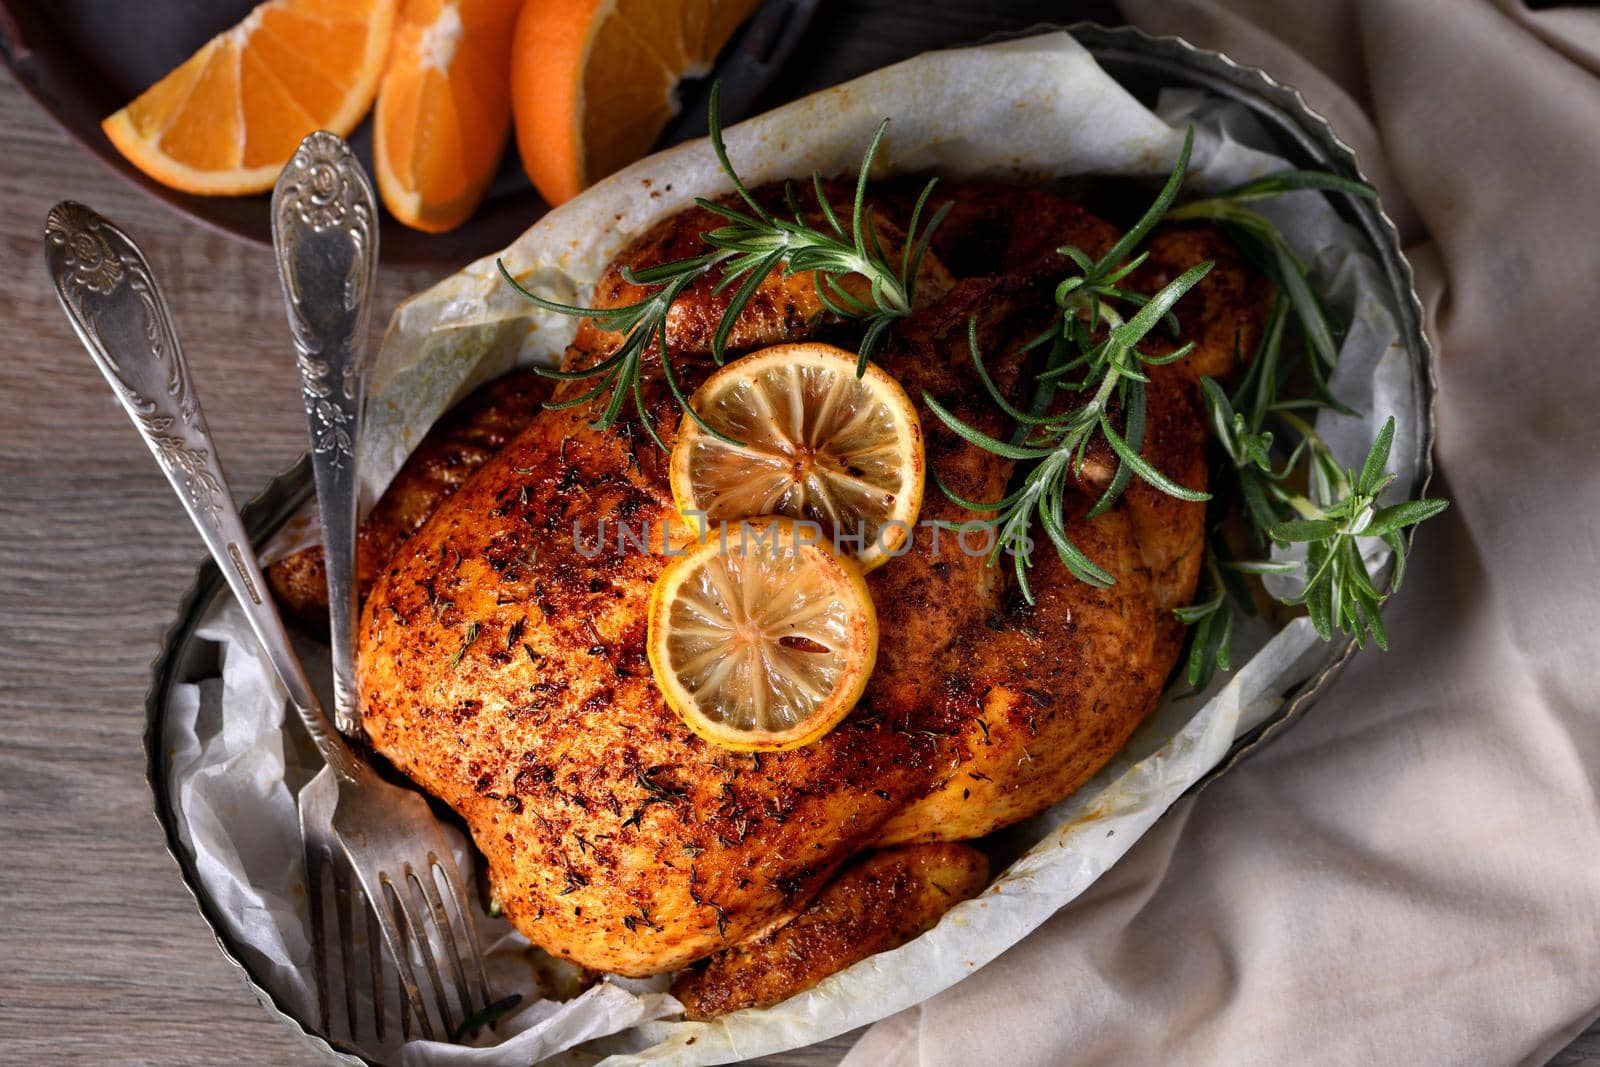 Baked whole chicken in spices with crispy appetizing fried crust in a tray, dark moody  